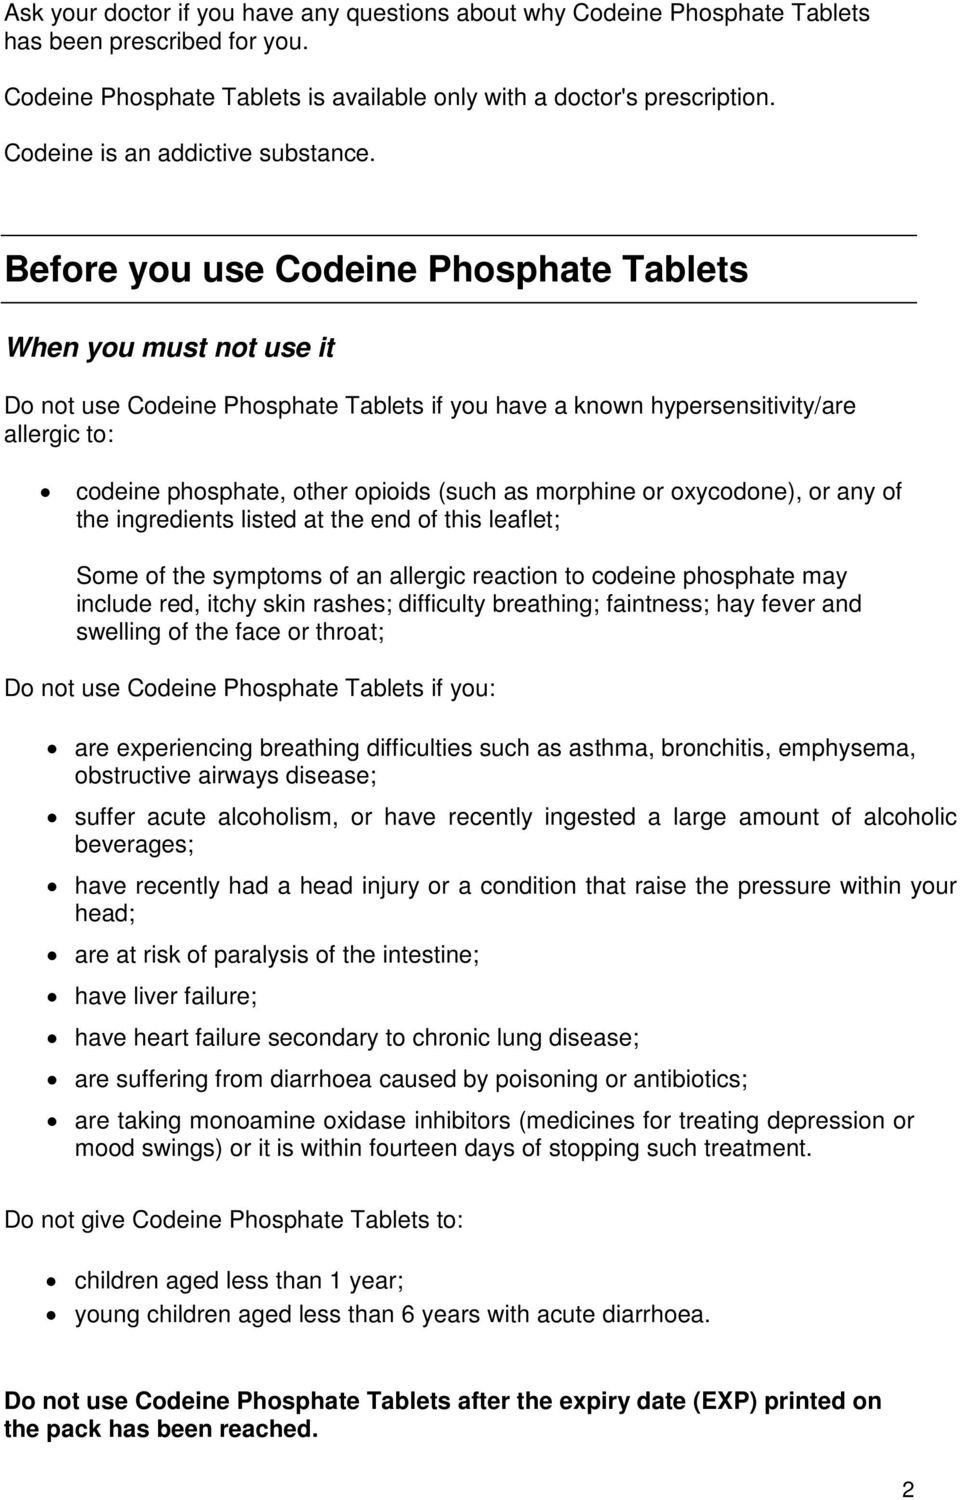 Before you use Codeine Phosphate Tablets When you must not use it Do not use Codeine Phosphate Tablets if you have a known hypersensitivity/are allergic to: codeine phosphate, other opioids (such as